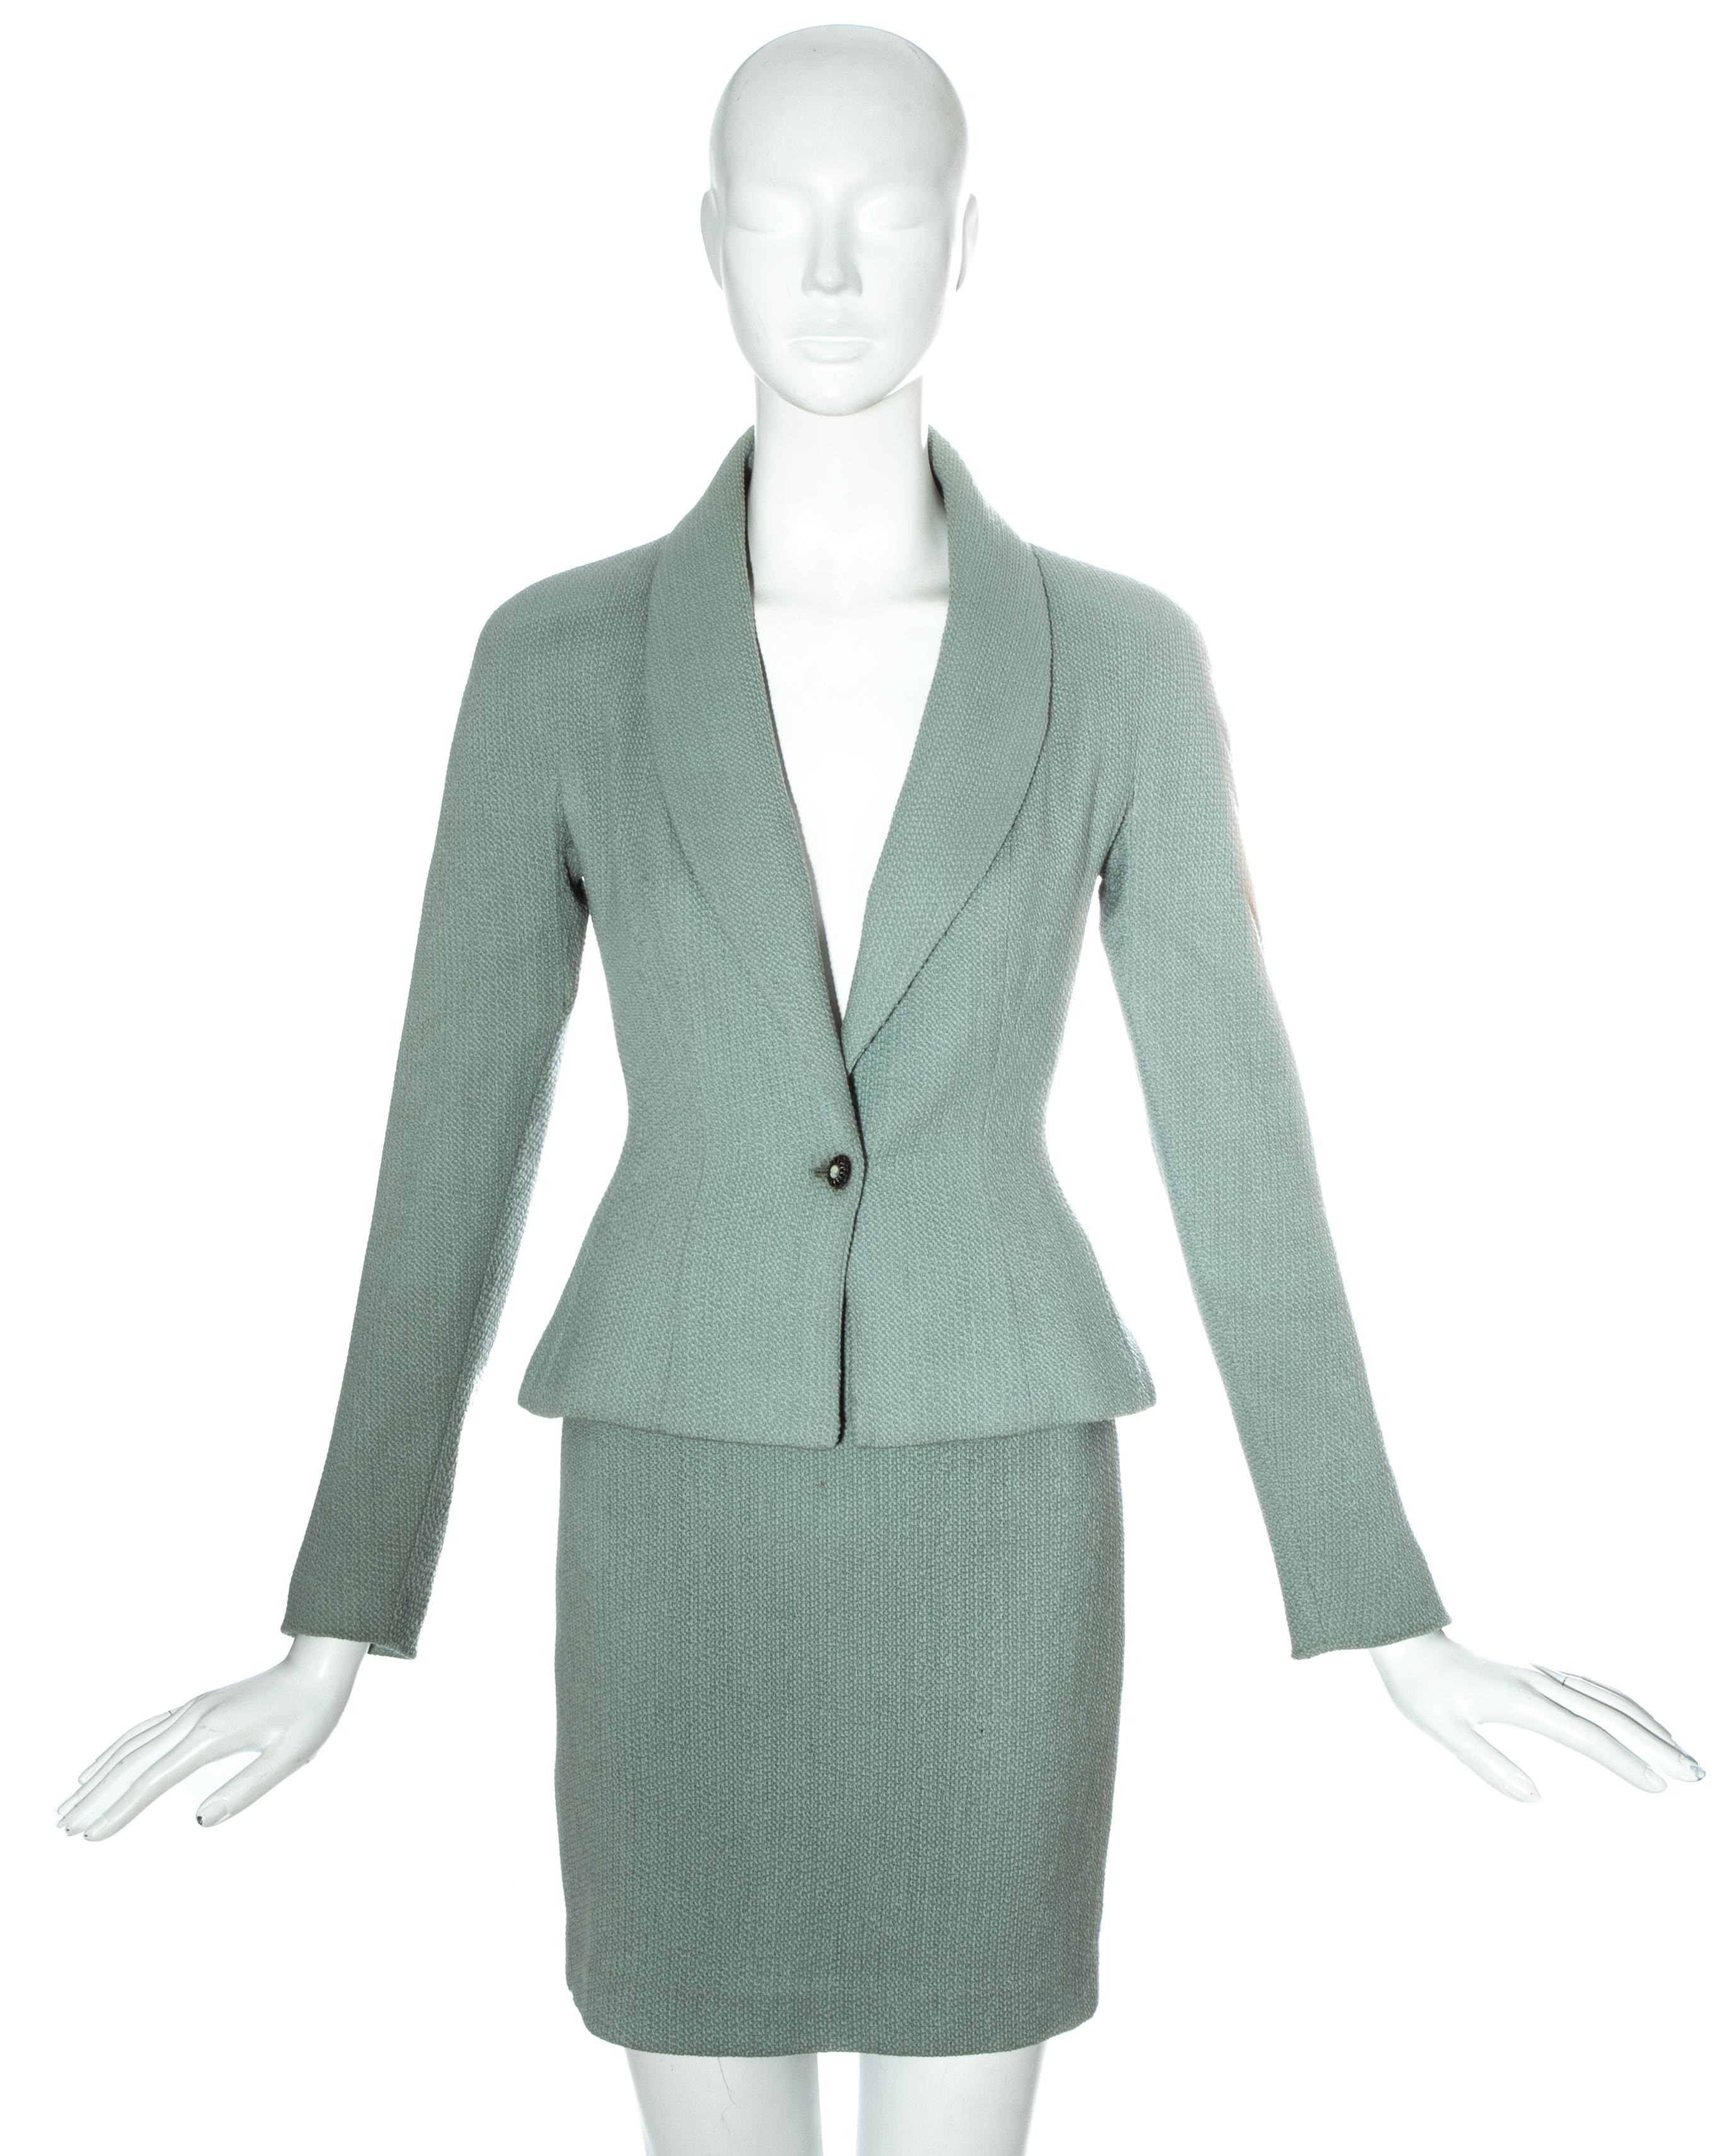 Christian Dior by John Galliano mint green wool skirt suit comprising: tailored jacket with accentuated waistline, shawl lapel, antique style cameo button fastening, embroidered 'CD' silk lining and matching mini skirt. 

Spring-Summer 1998